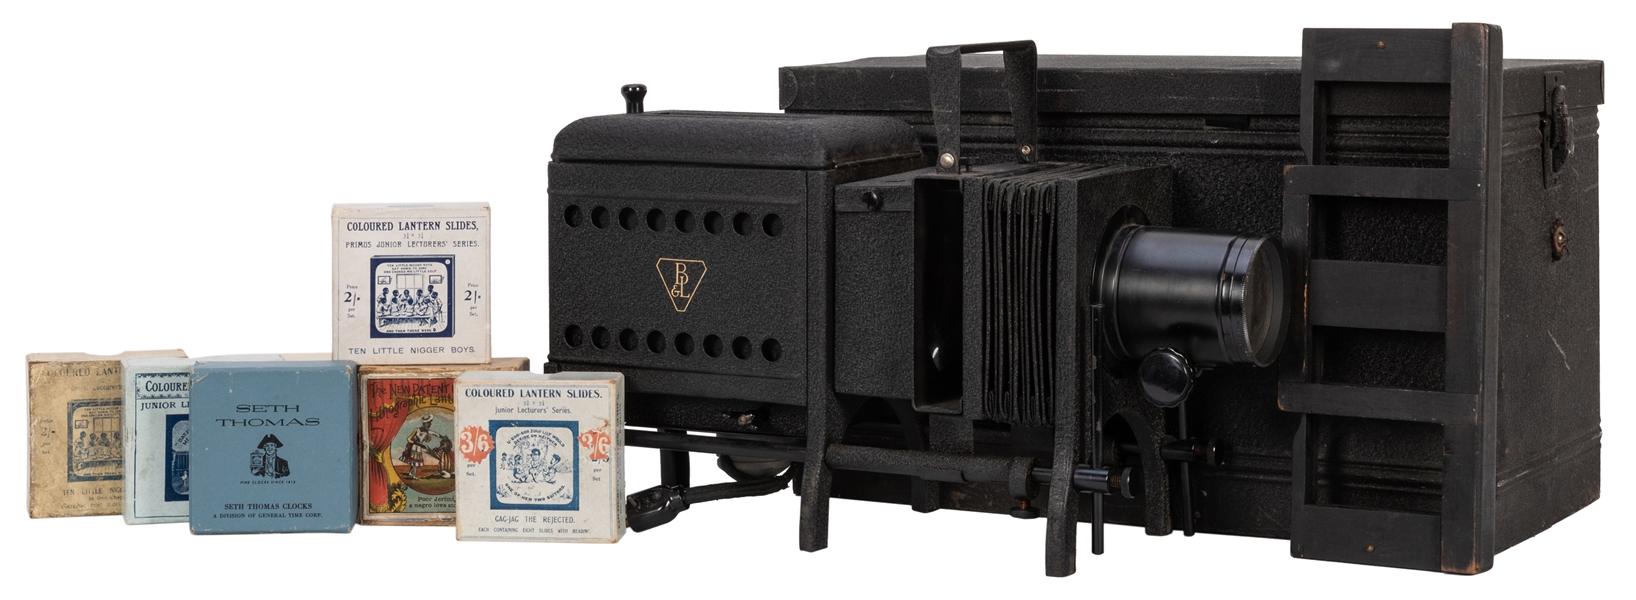 Bausch & Lomb Magic Lantern Projector with Slides.